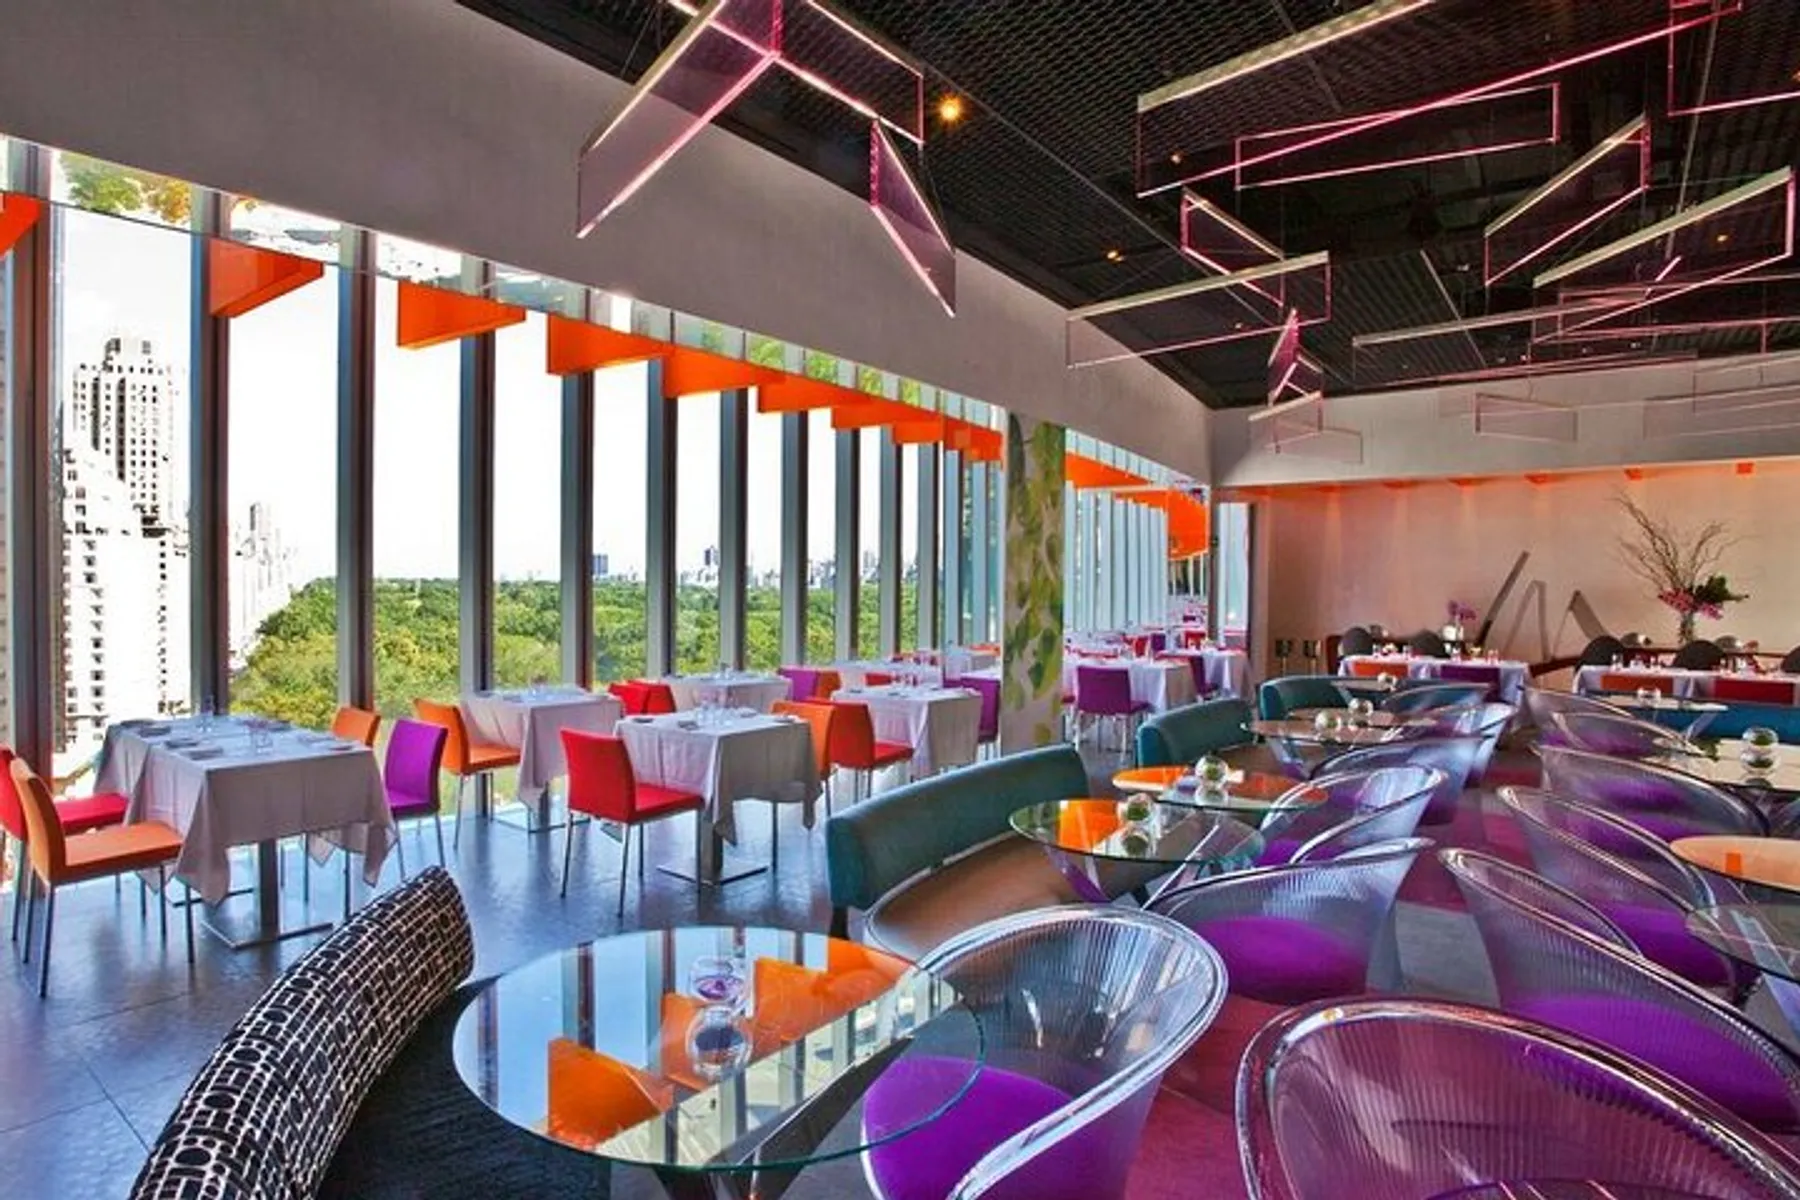 The image shows a modern restaurant interior with vibrant colors, contemporary furnishings, and large windows that offer plenty of natural light.